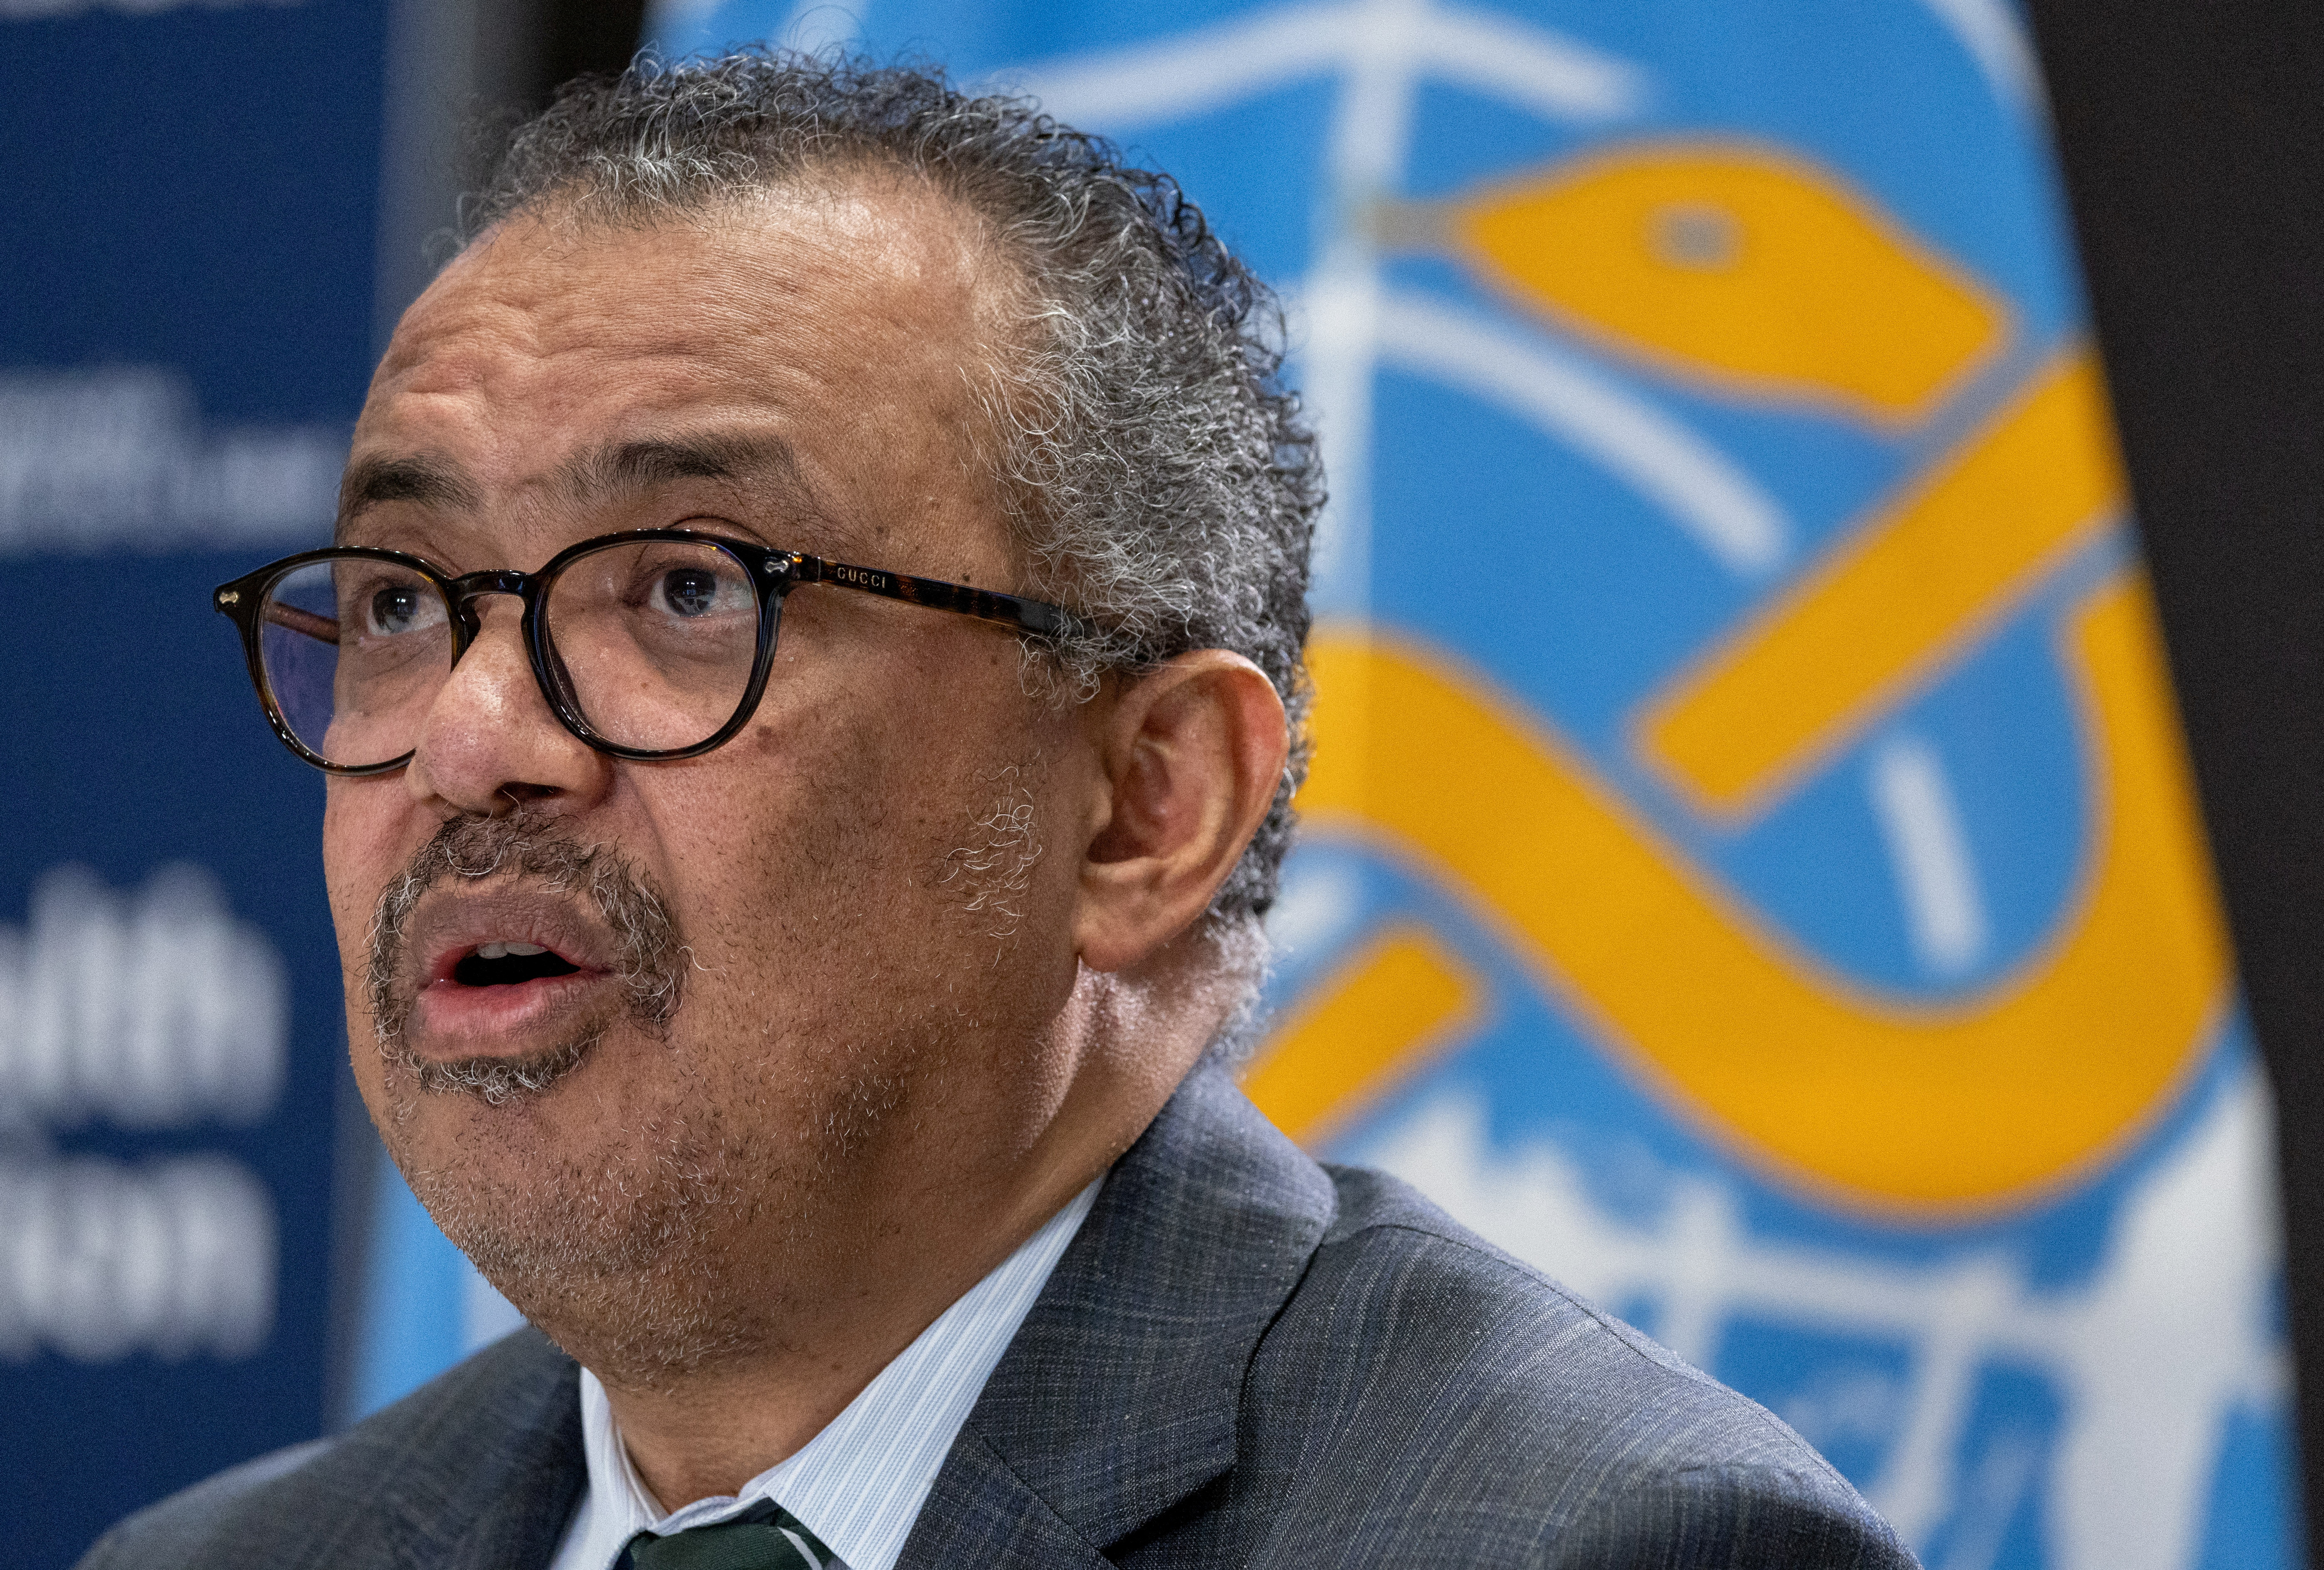 Director-General of the WHO Dr. Tedros attends an ACANU briefing in Geneva